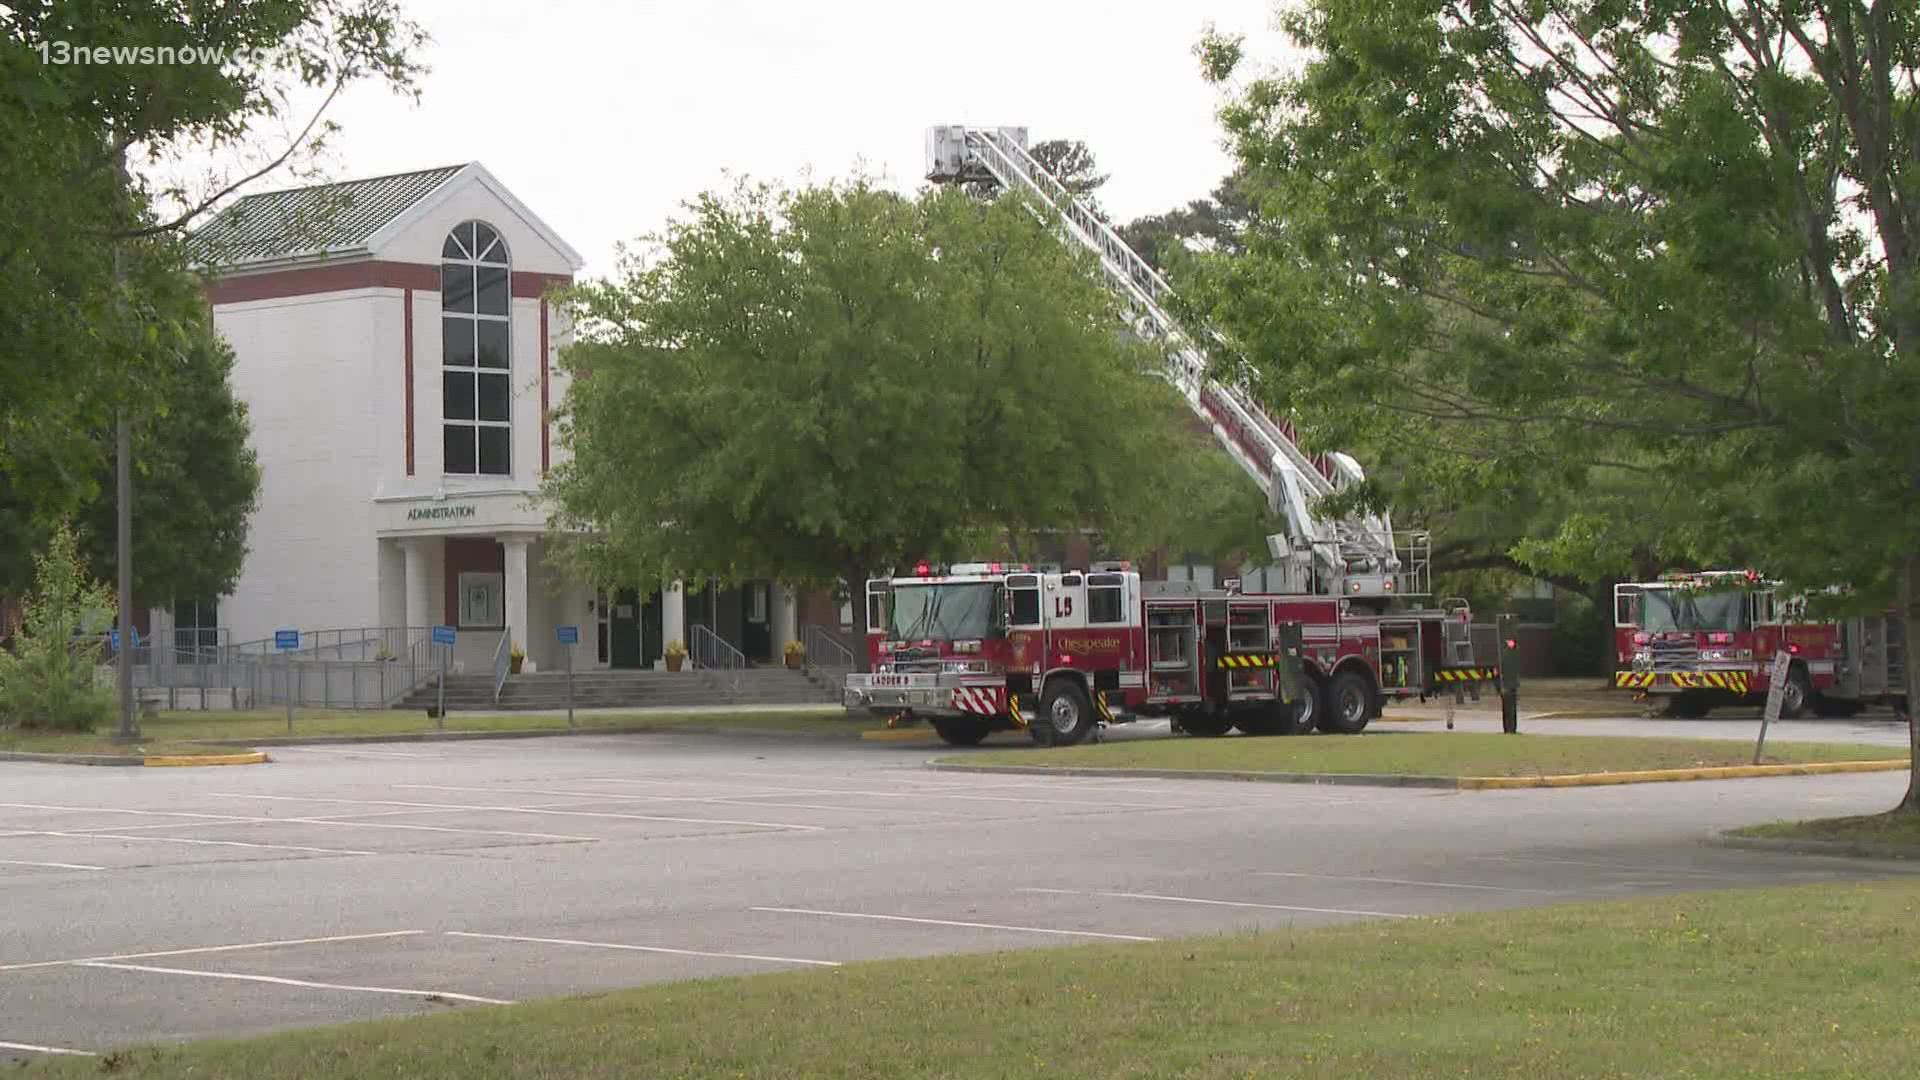 The Chesapeake Fire Department responded to the scene of a commercial structure fire at Great Bridge Middle School.